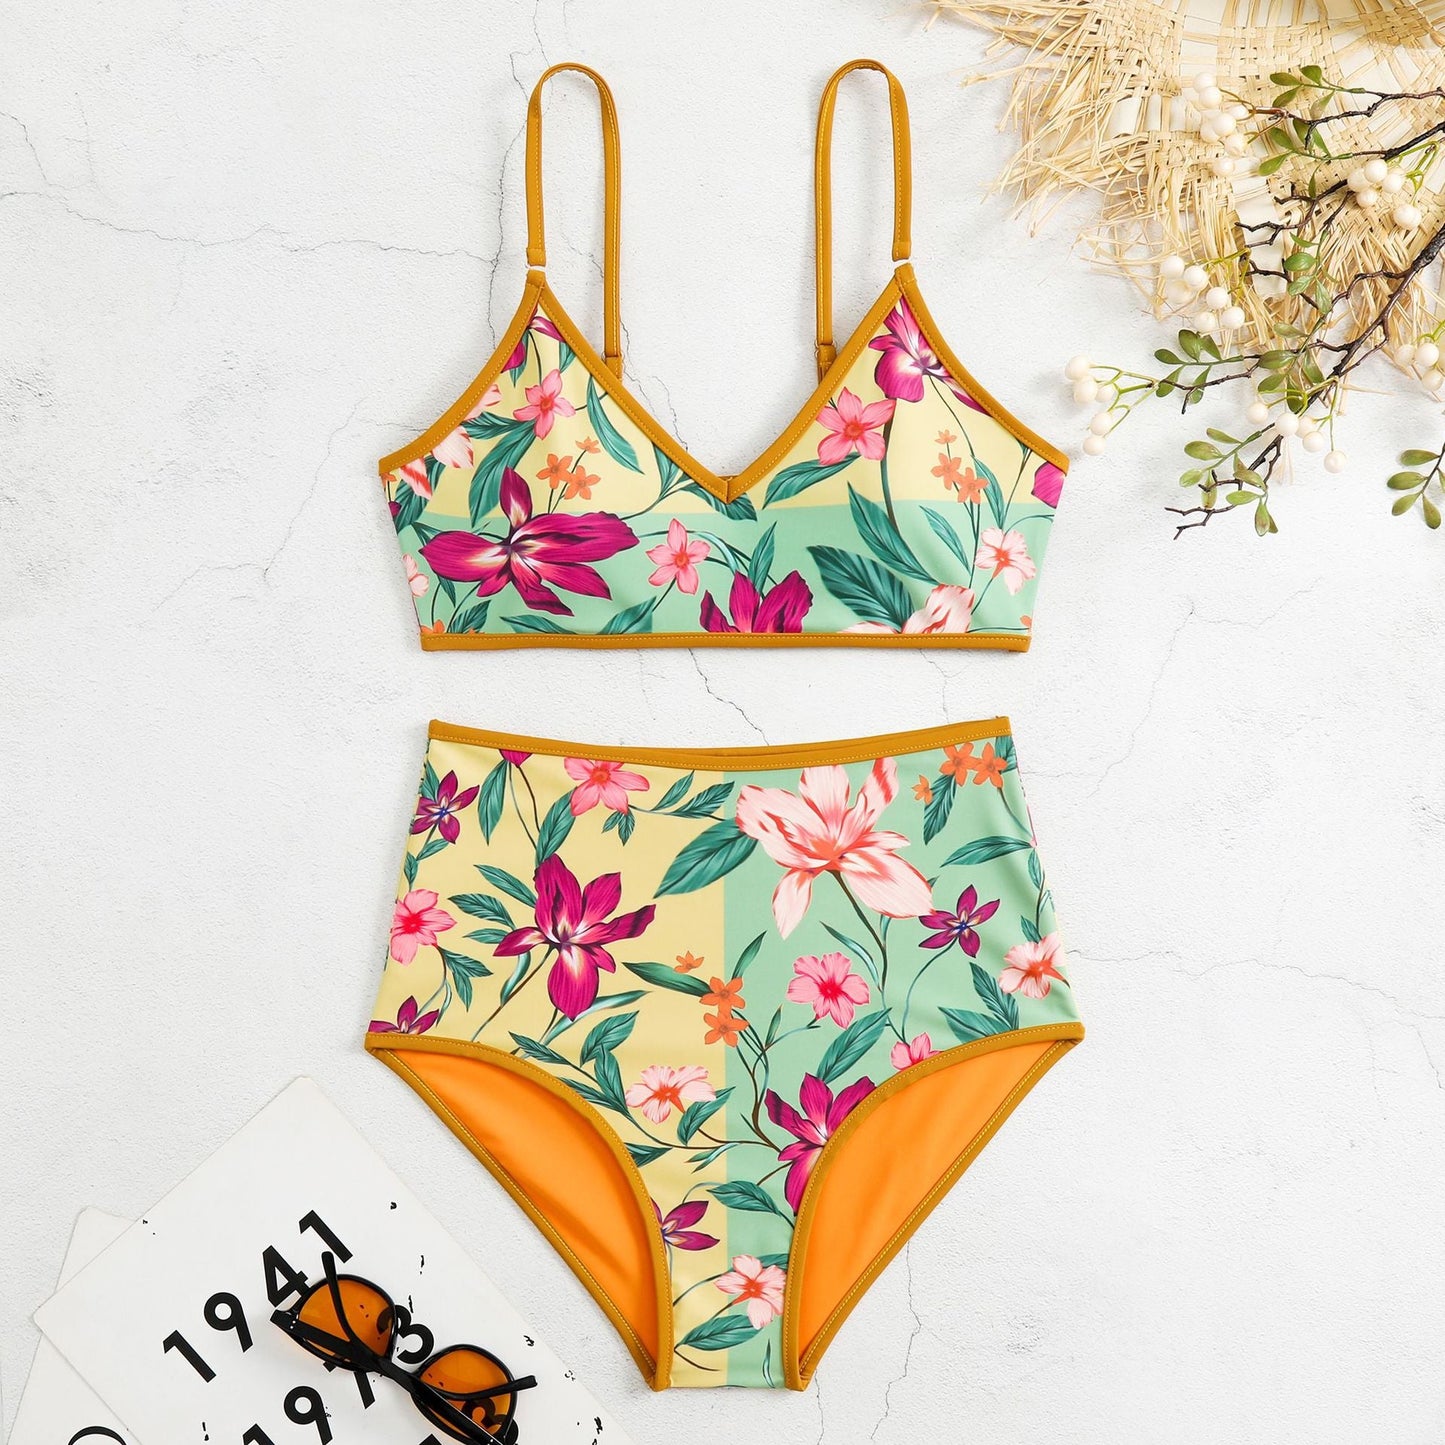 Allover Plant Print Reversible Two Piece Swimsuit Spaghetti Strap High Waisted Bikini Sets